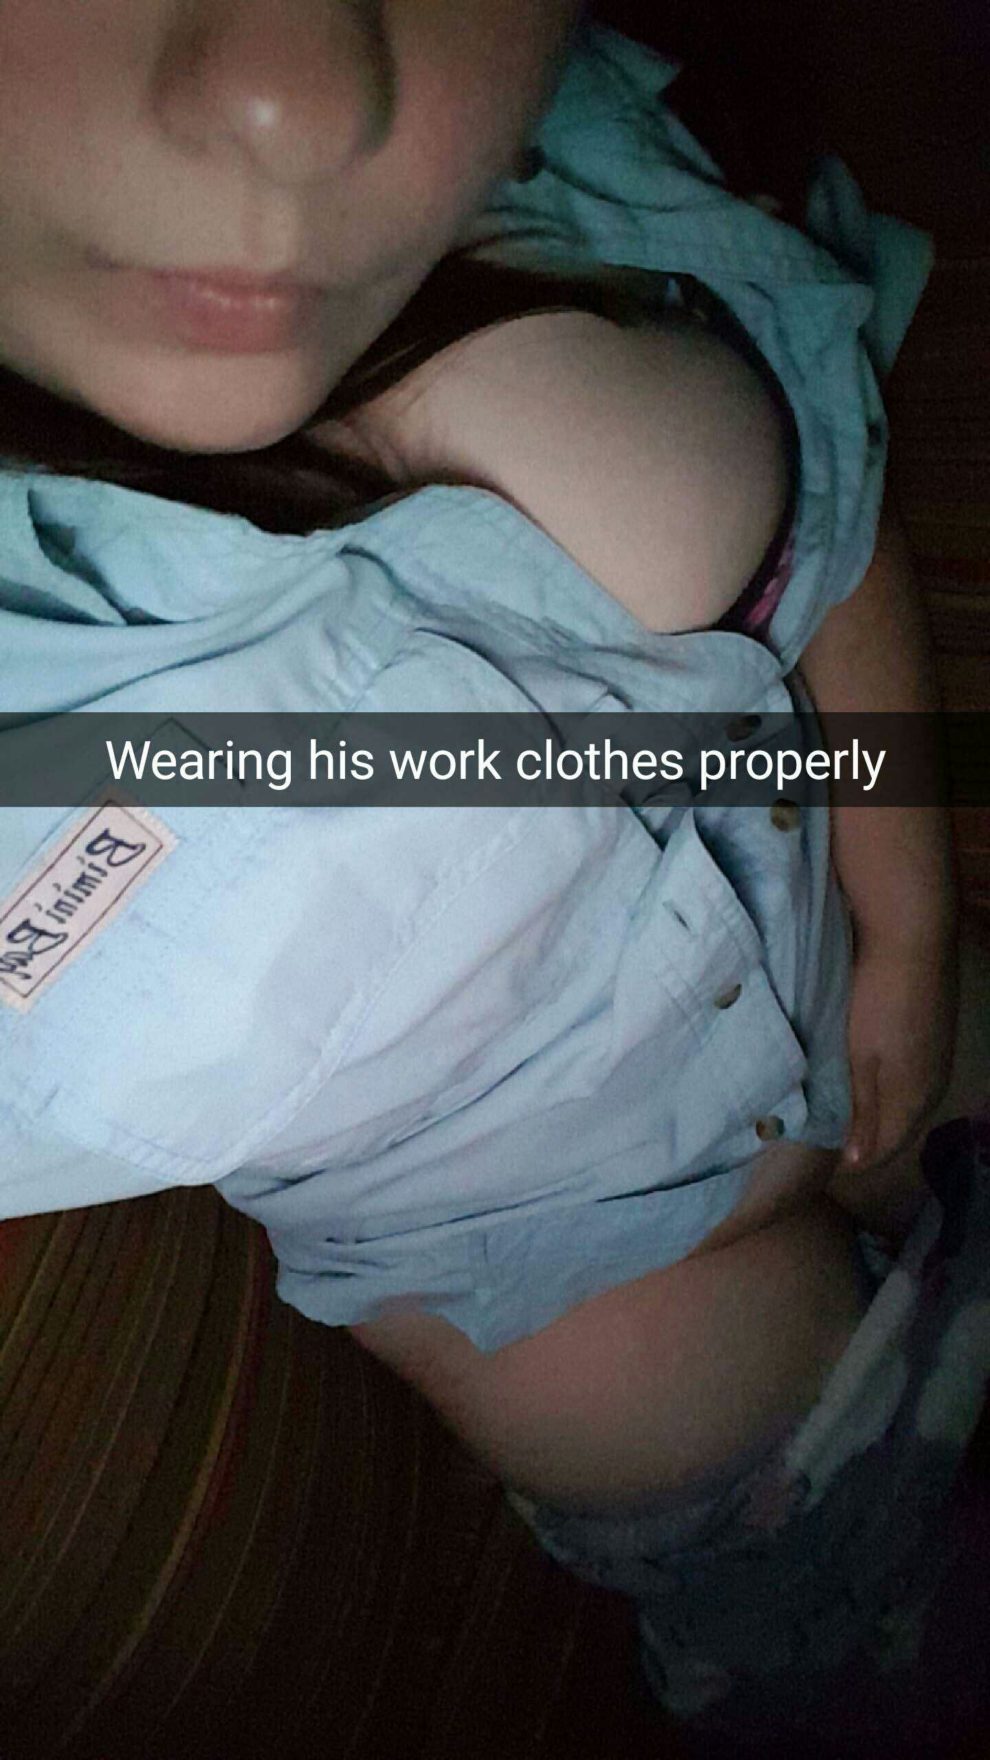 Stole his work clothes I wear them better